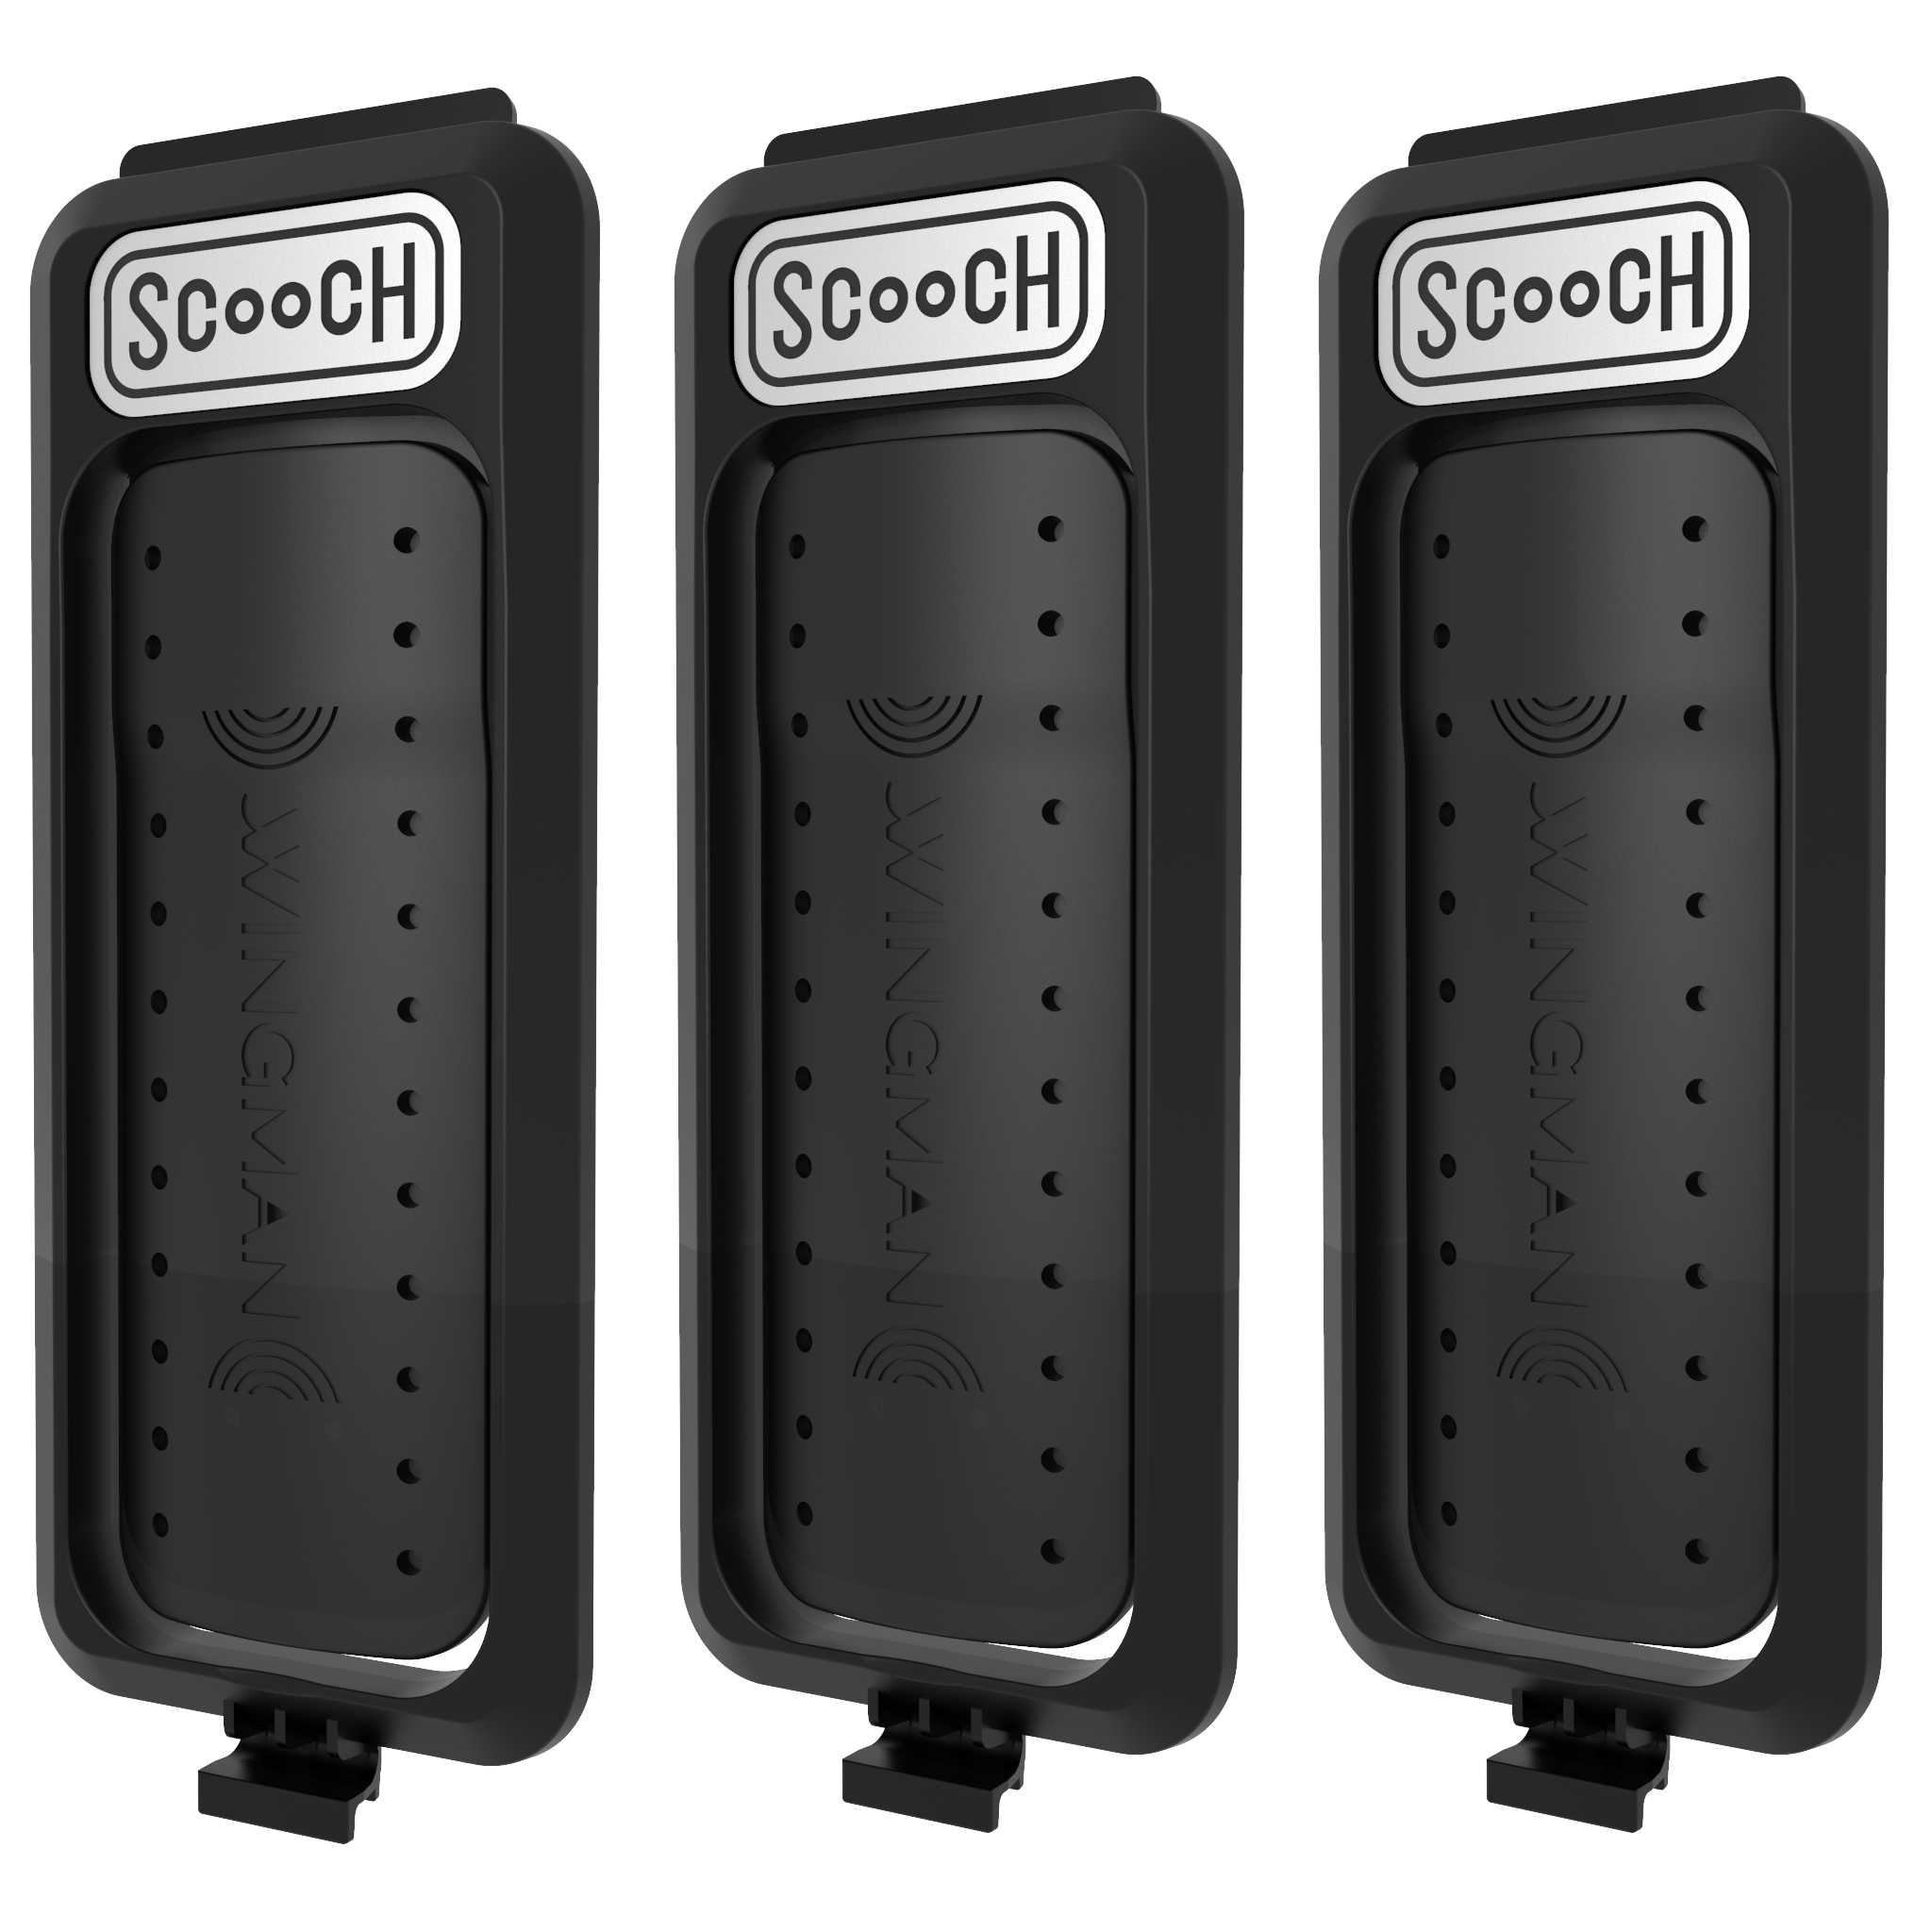 Scooch Kickstand Replacement for Wingman Cases Black3-PackSave$11 Scooch Warranty